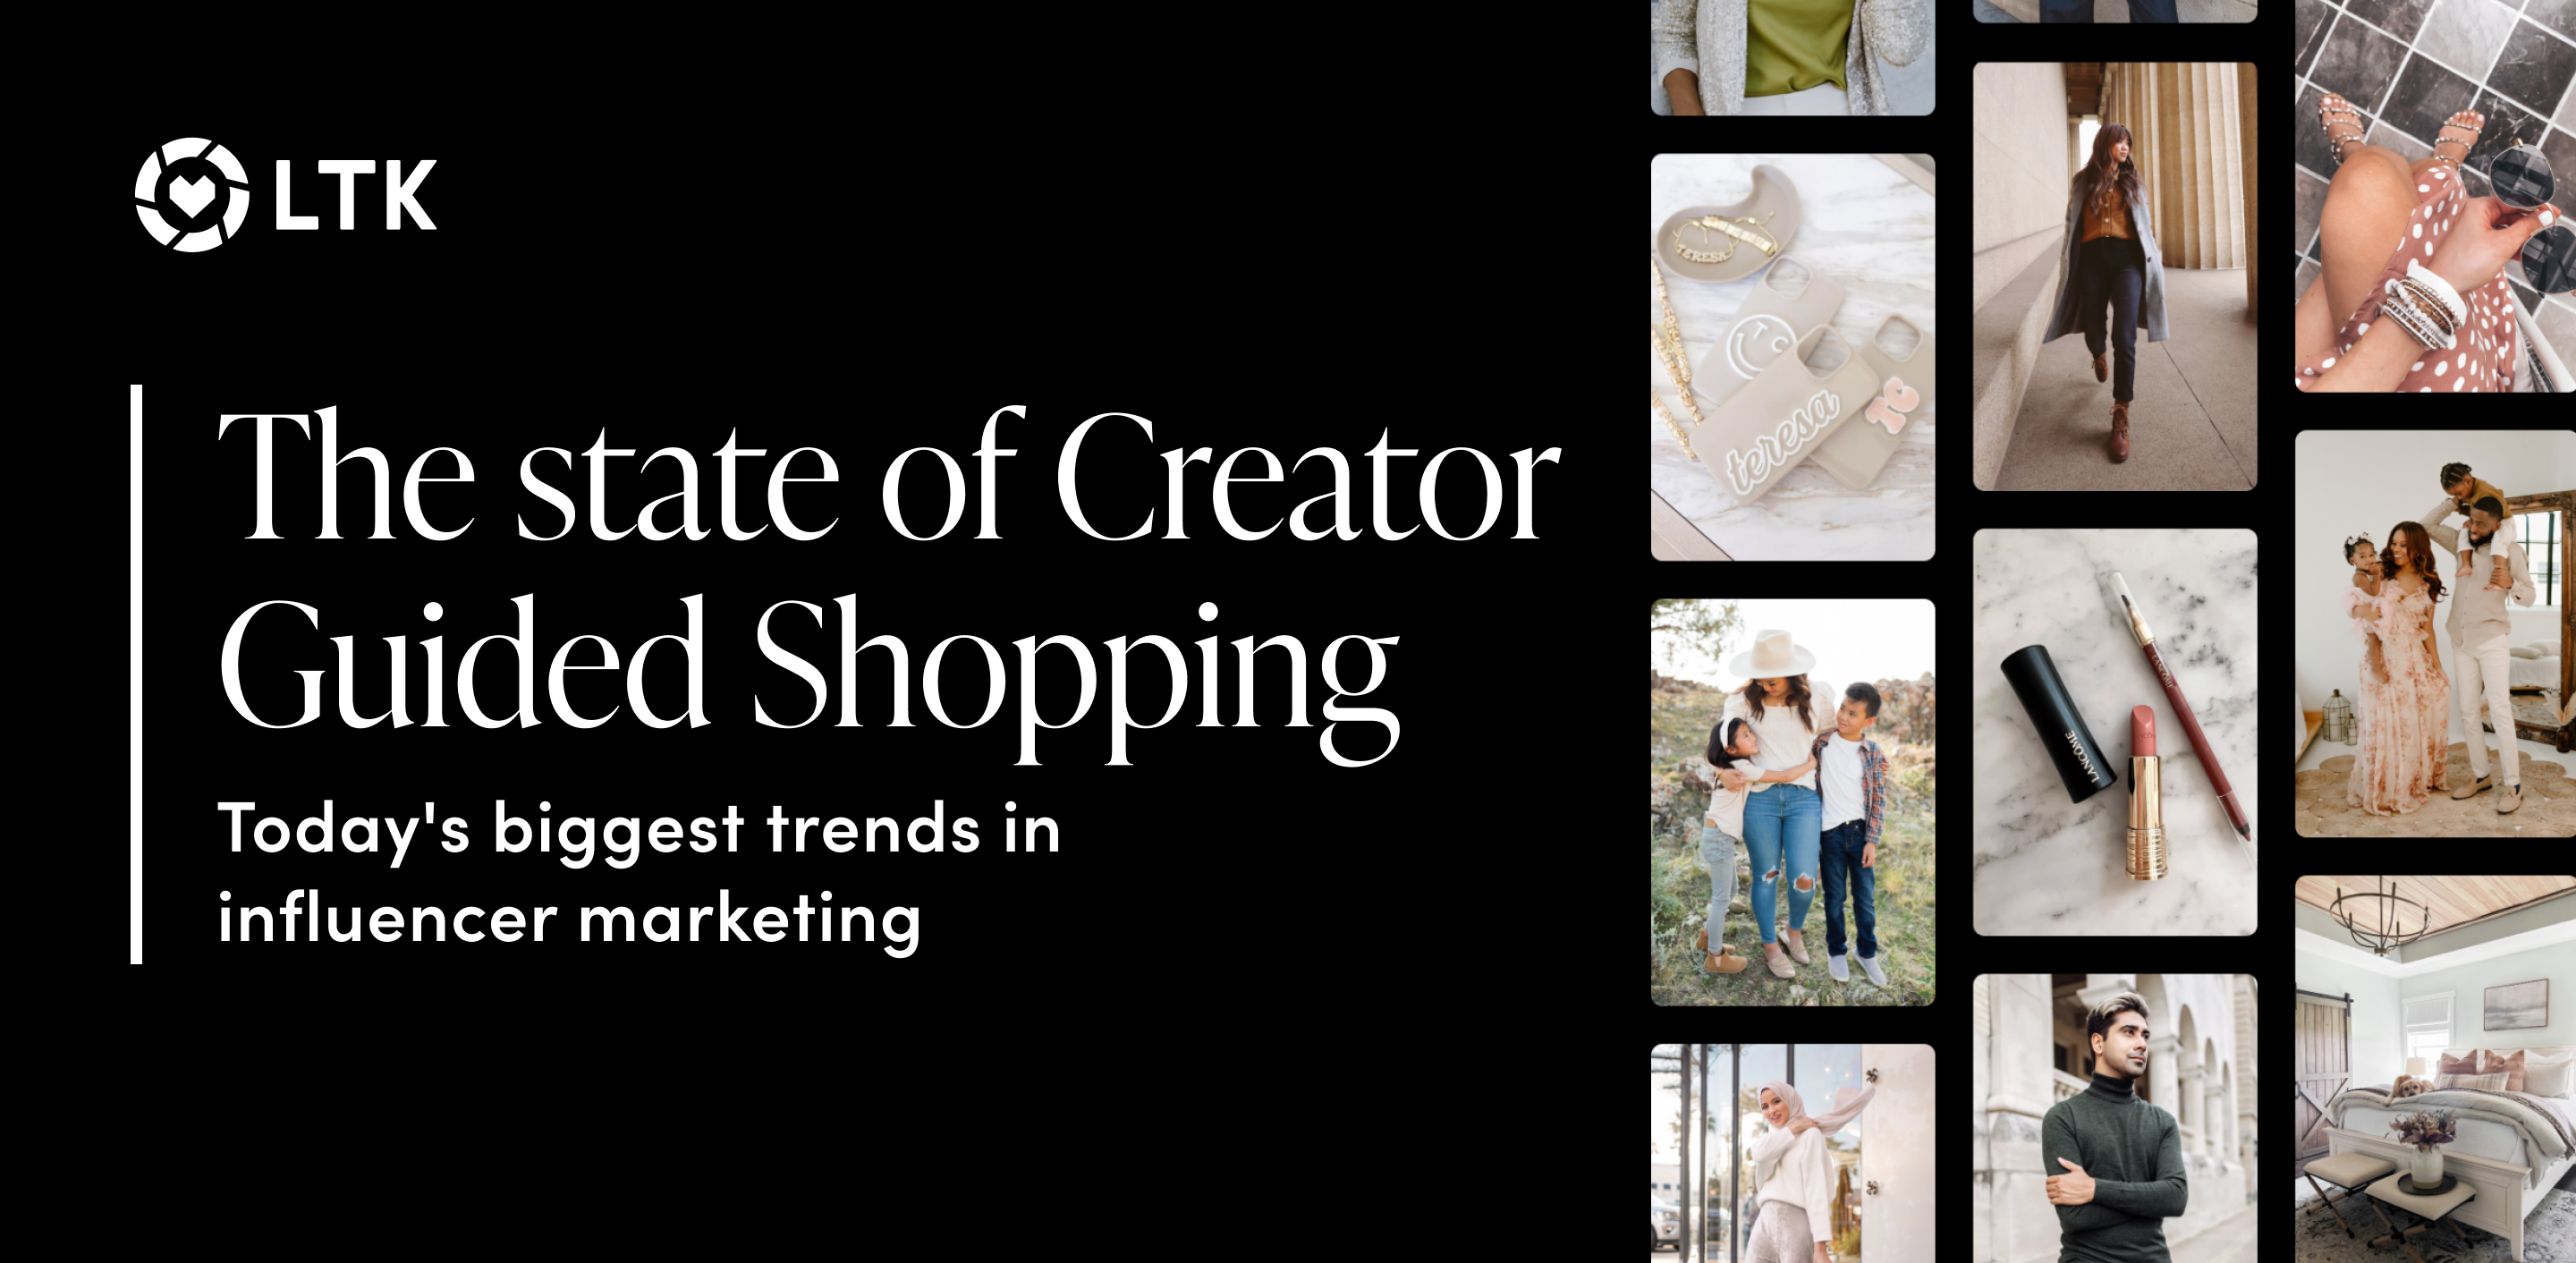 LTK and creators: the new landscape of fashion retail